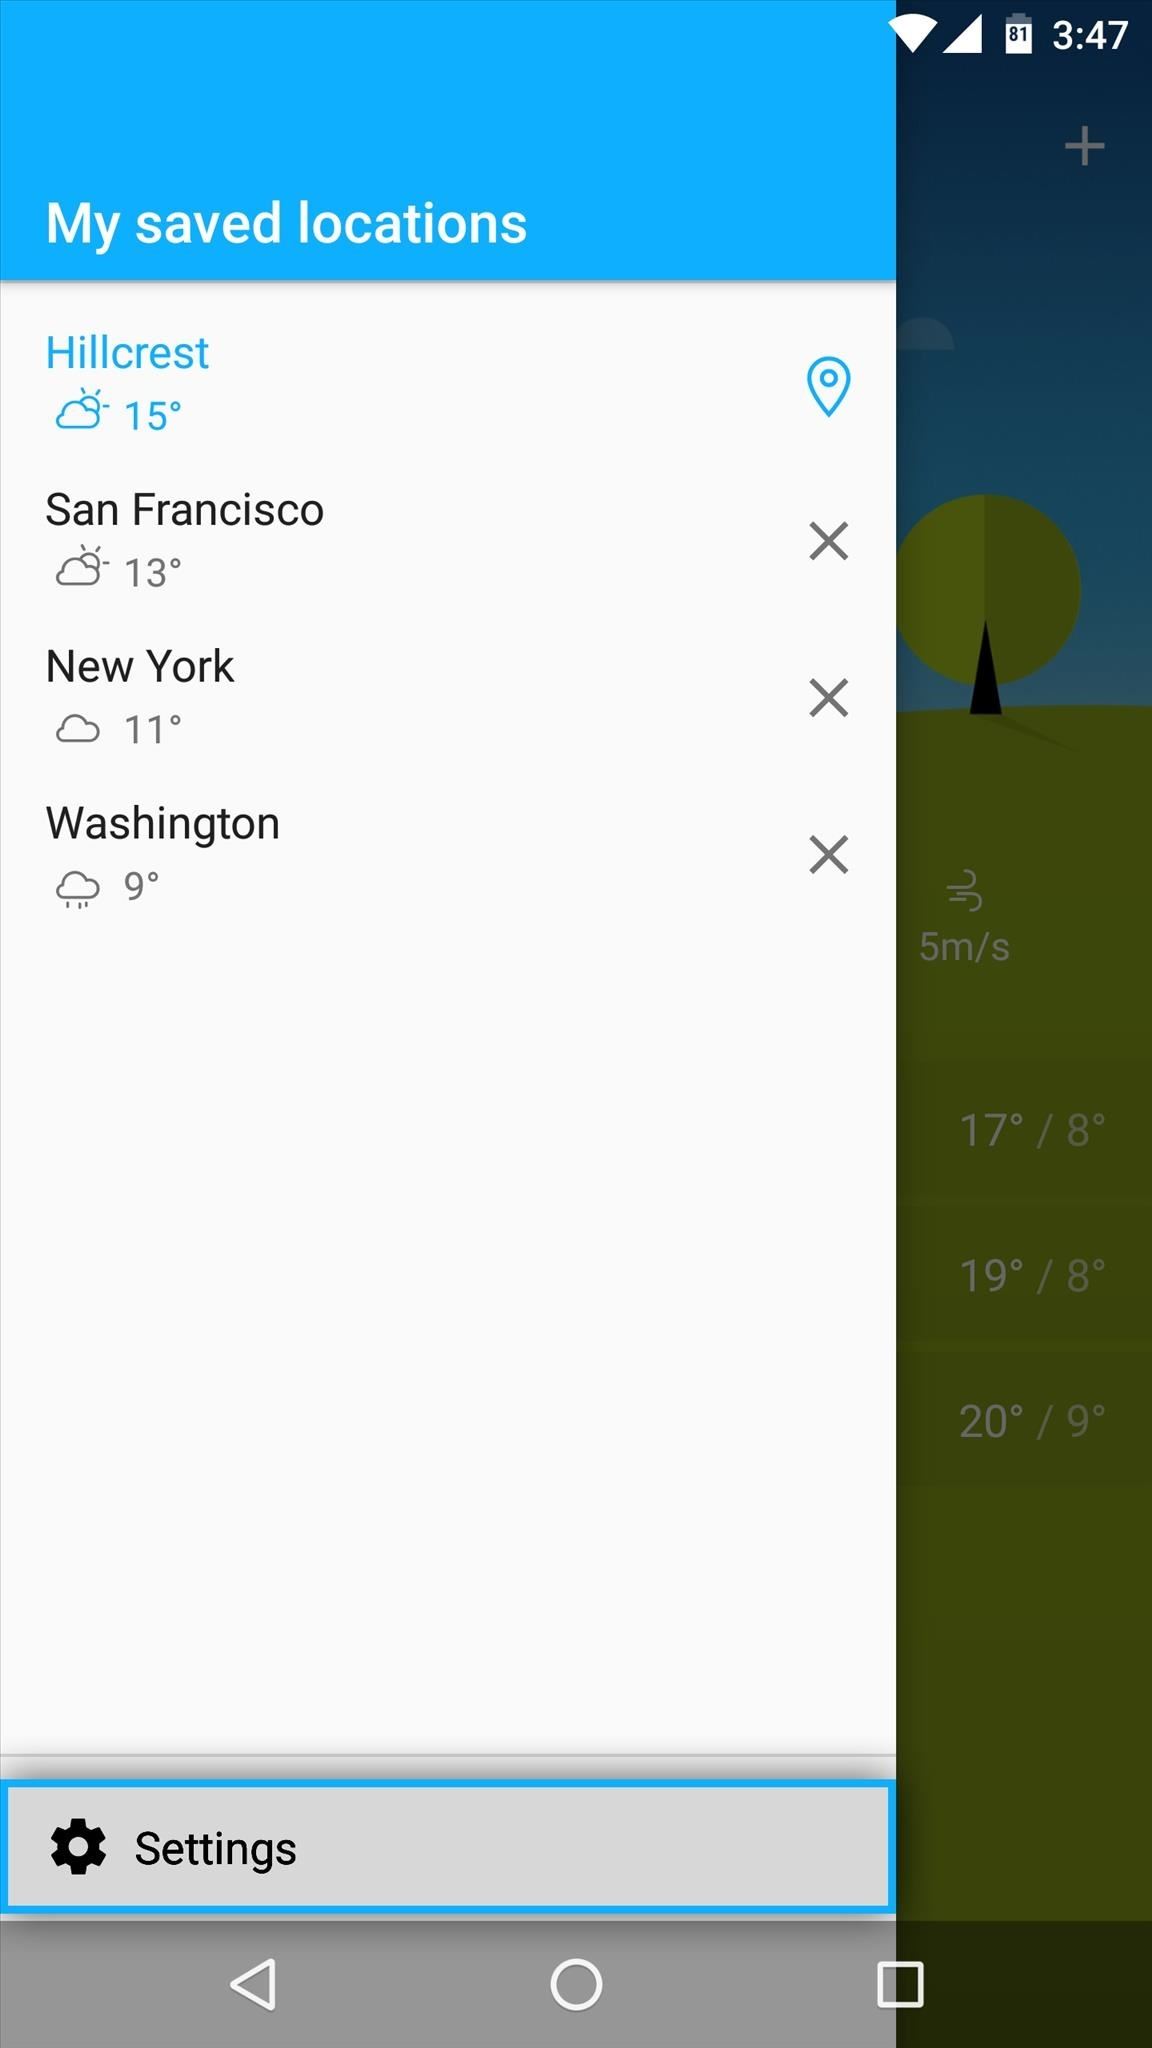 How to Get Sony's Xperia Weather App on Any Android Device